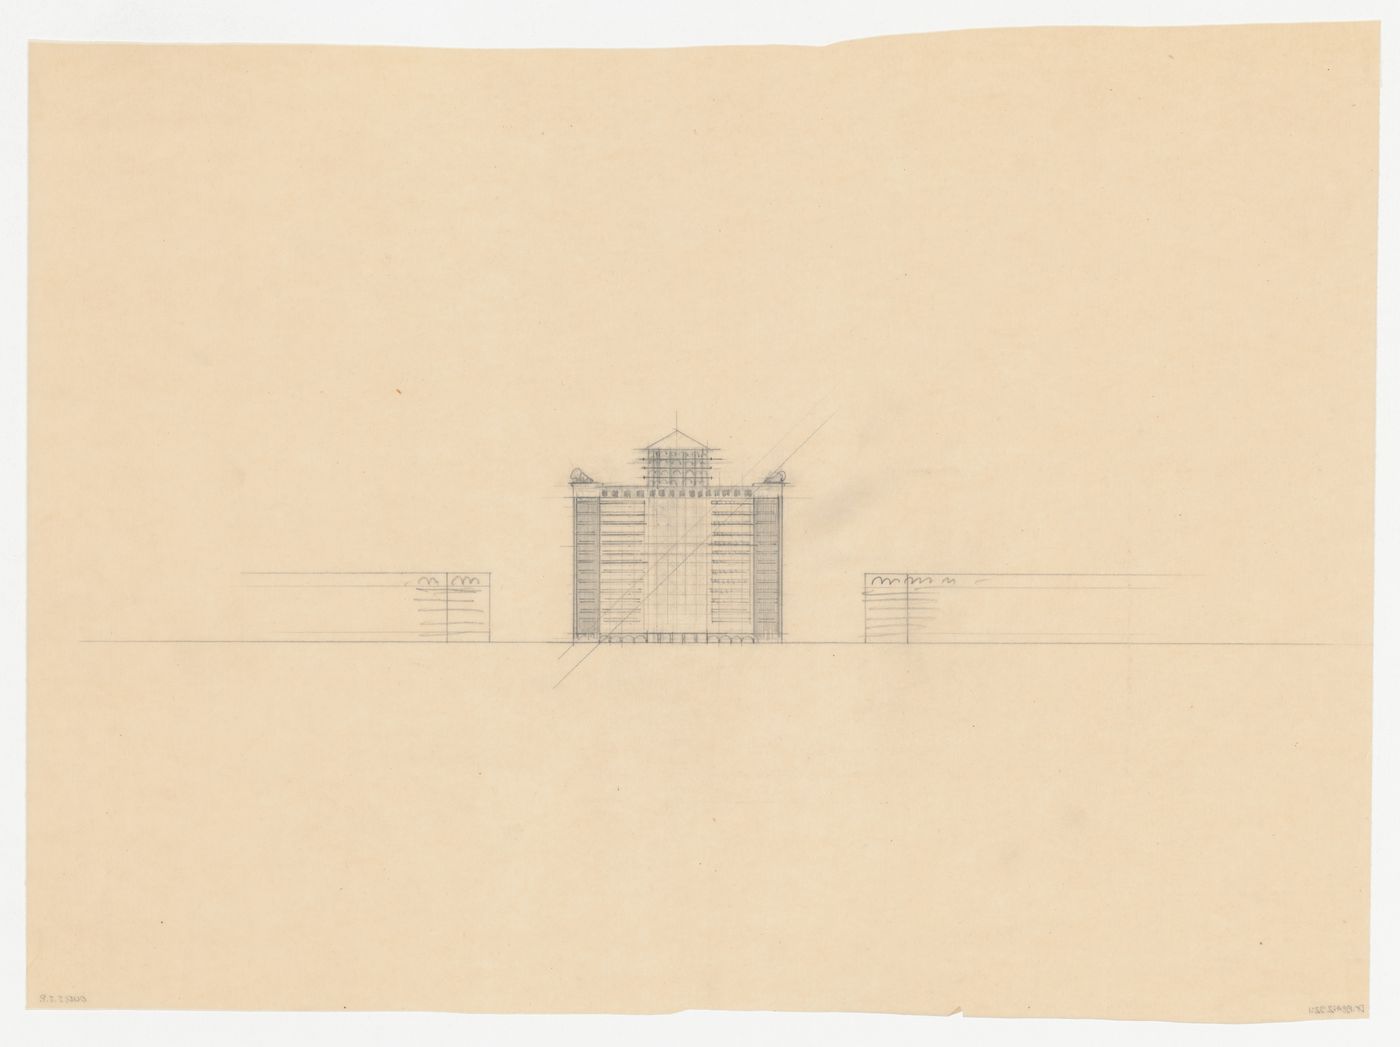 Elevation for Industriegebouw Plan A for the reconstruction of the Hofplein (city centre), Rotterdam, Netherlands